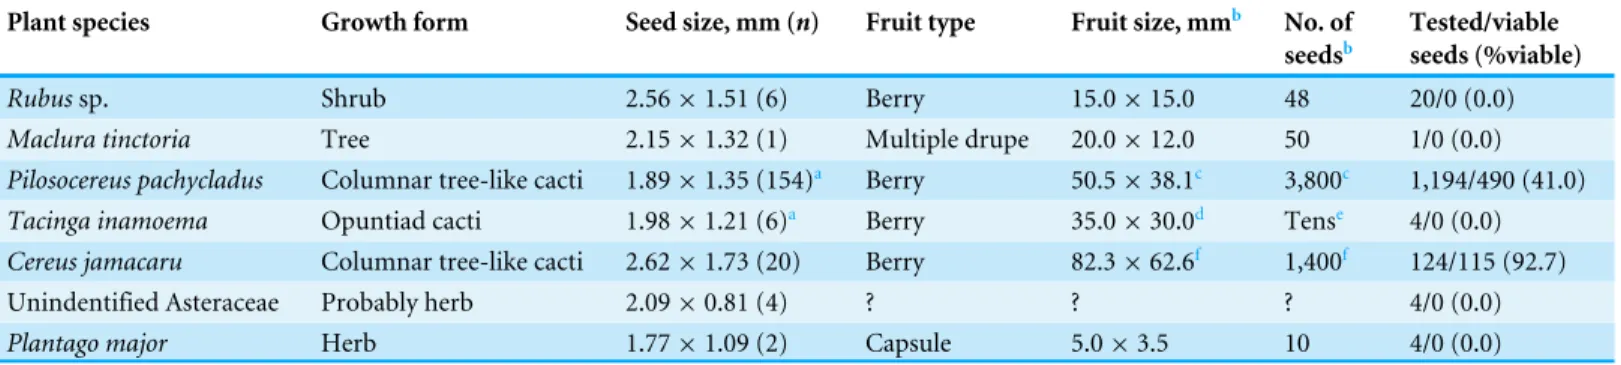 Table 2 Features of plants and fruits whose seeds were found in parrot faeces, and seed viability according to the tetrazolium test.